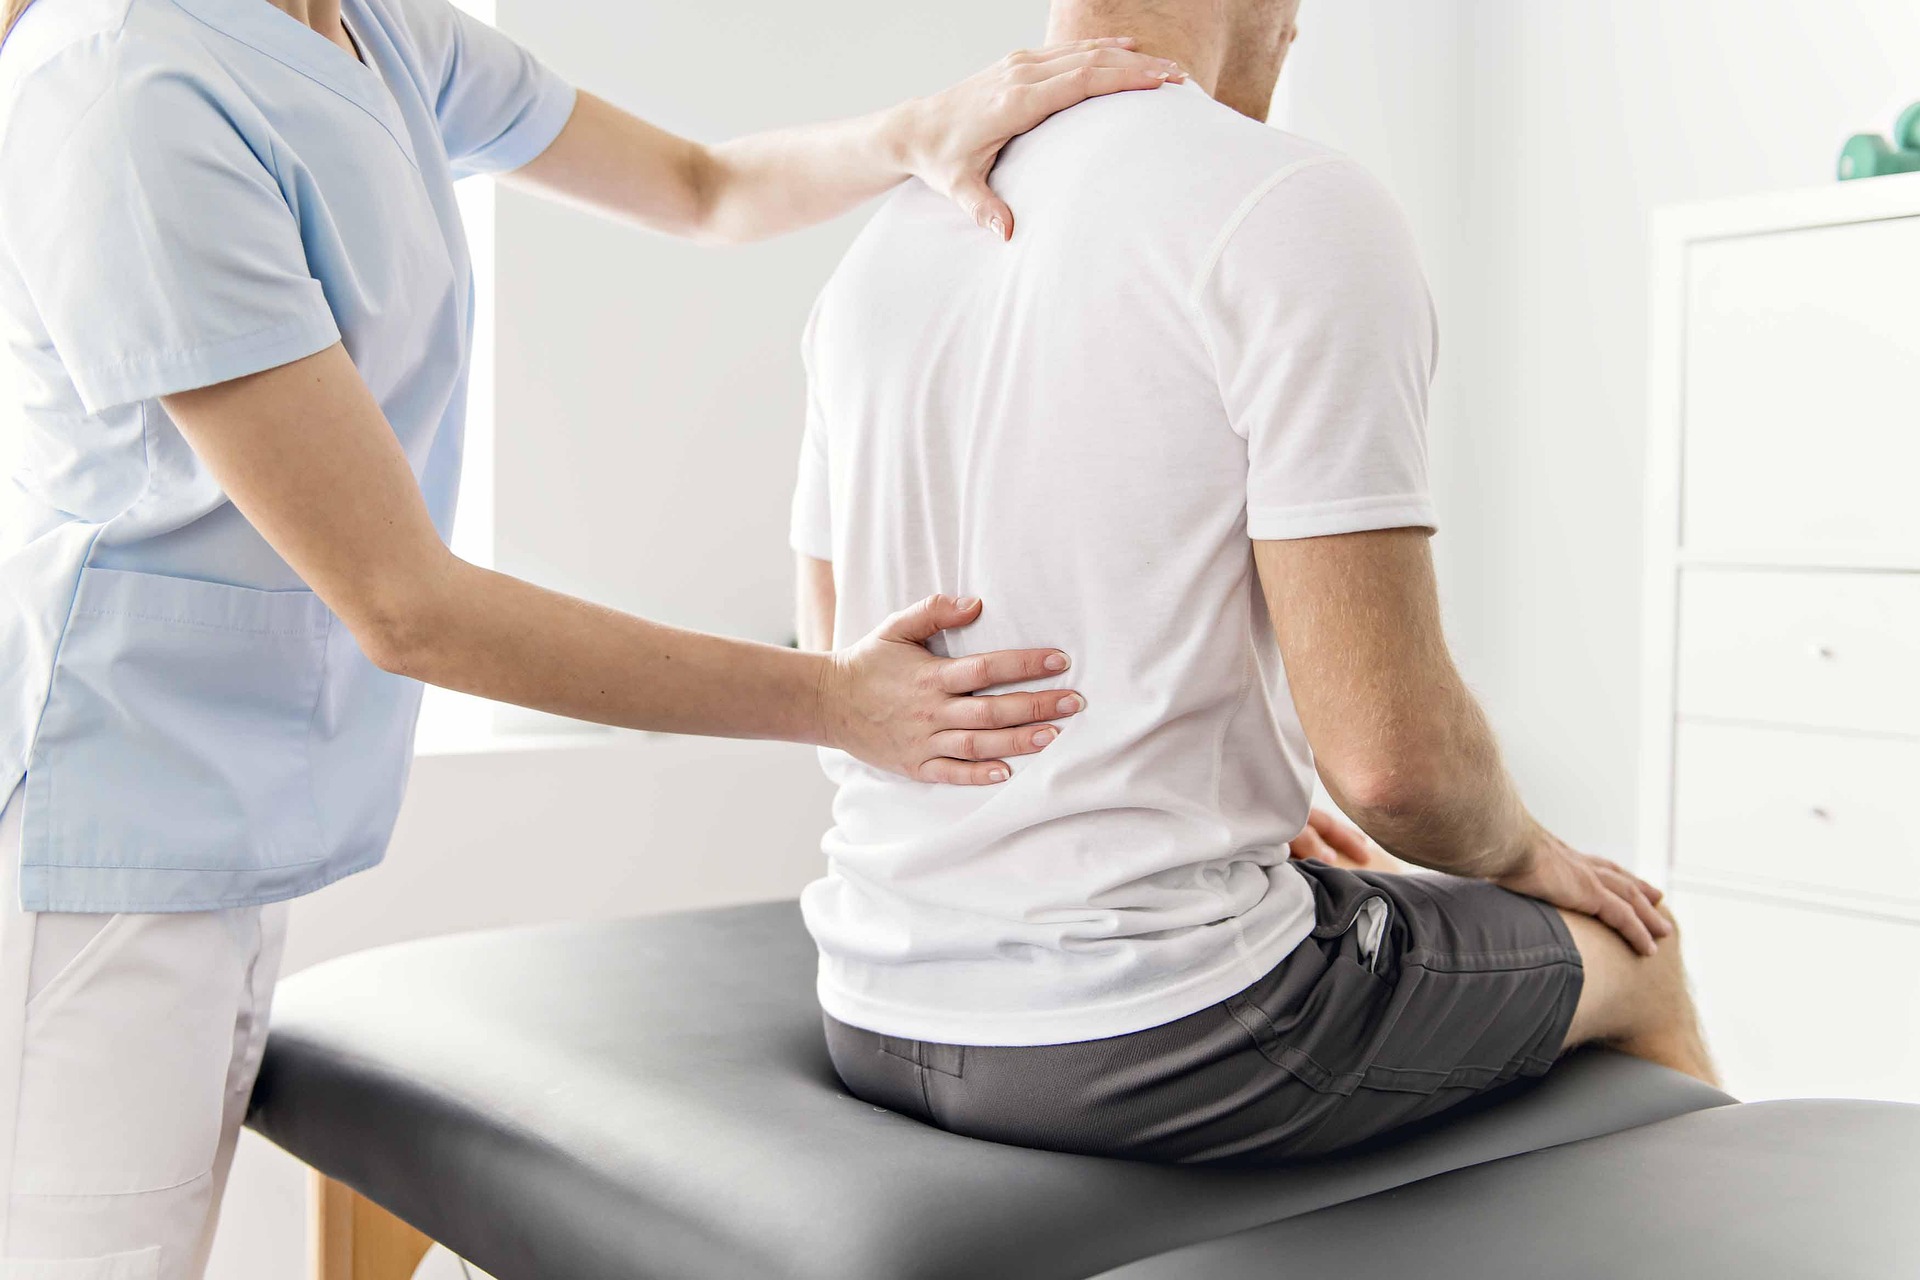 an image of a spinal cord complex care worker examining the spine of a patient